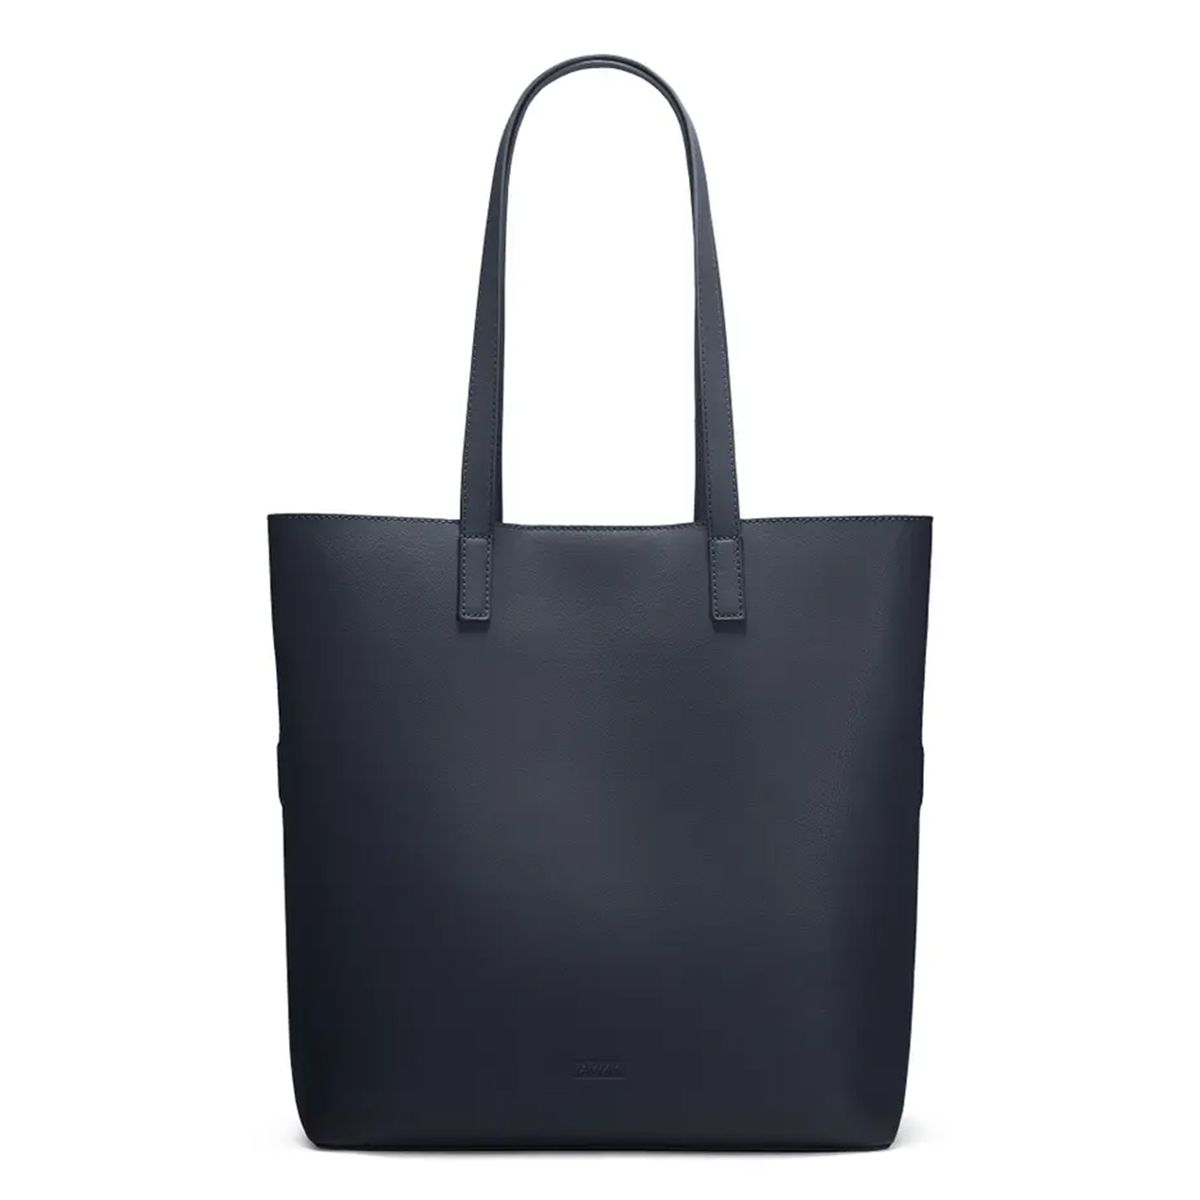 Away The Longitude tote in navy blue leather